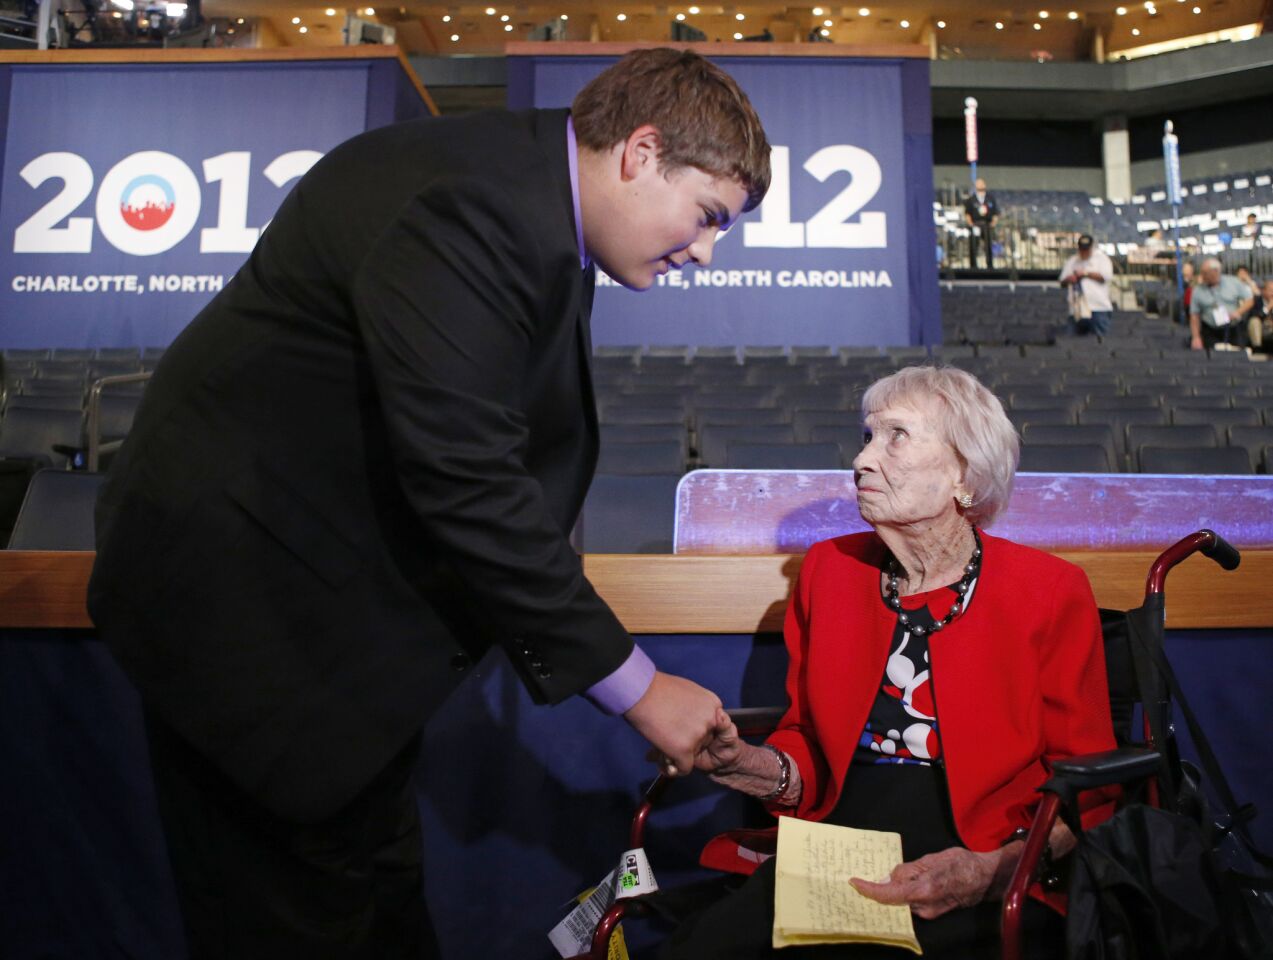 The youngest delegate Sam Gray, 17, from Marion, Iowa, meets the oldest delegate Elzena Johnson, 97, from Terry, Miss., at the Democratic National Convention in Charlotte, N.C.